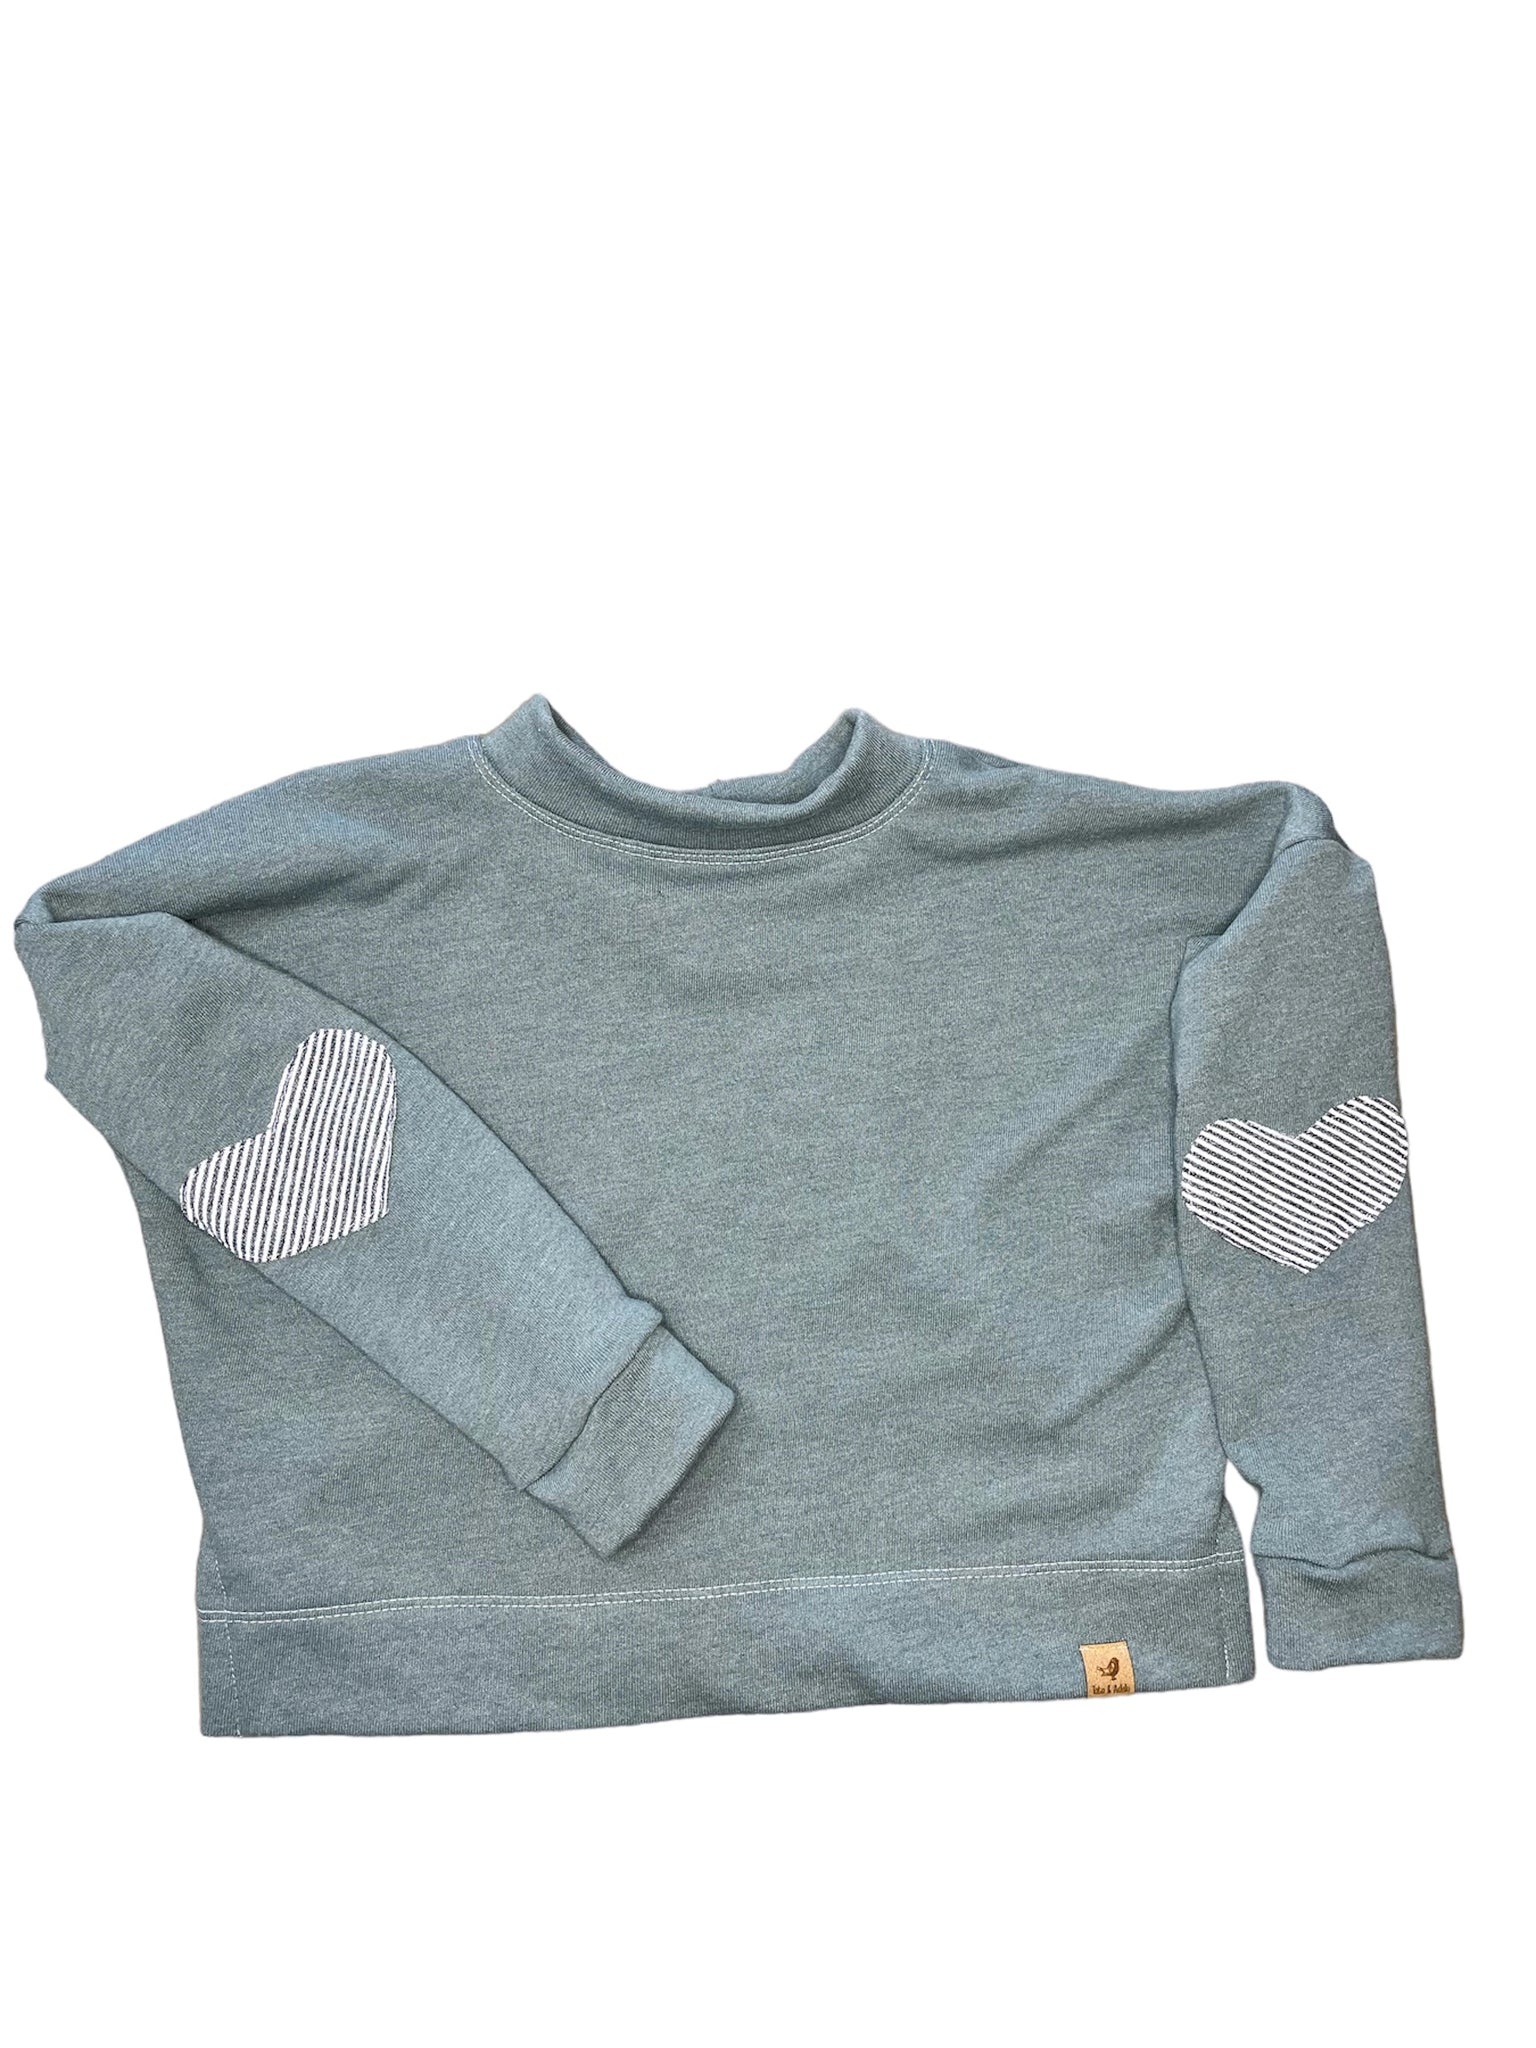 Tate Elbow Patch Sweater